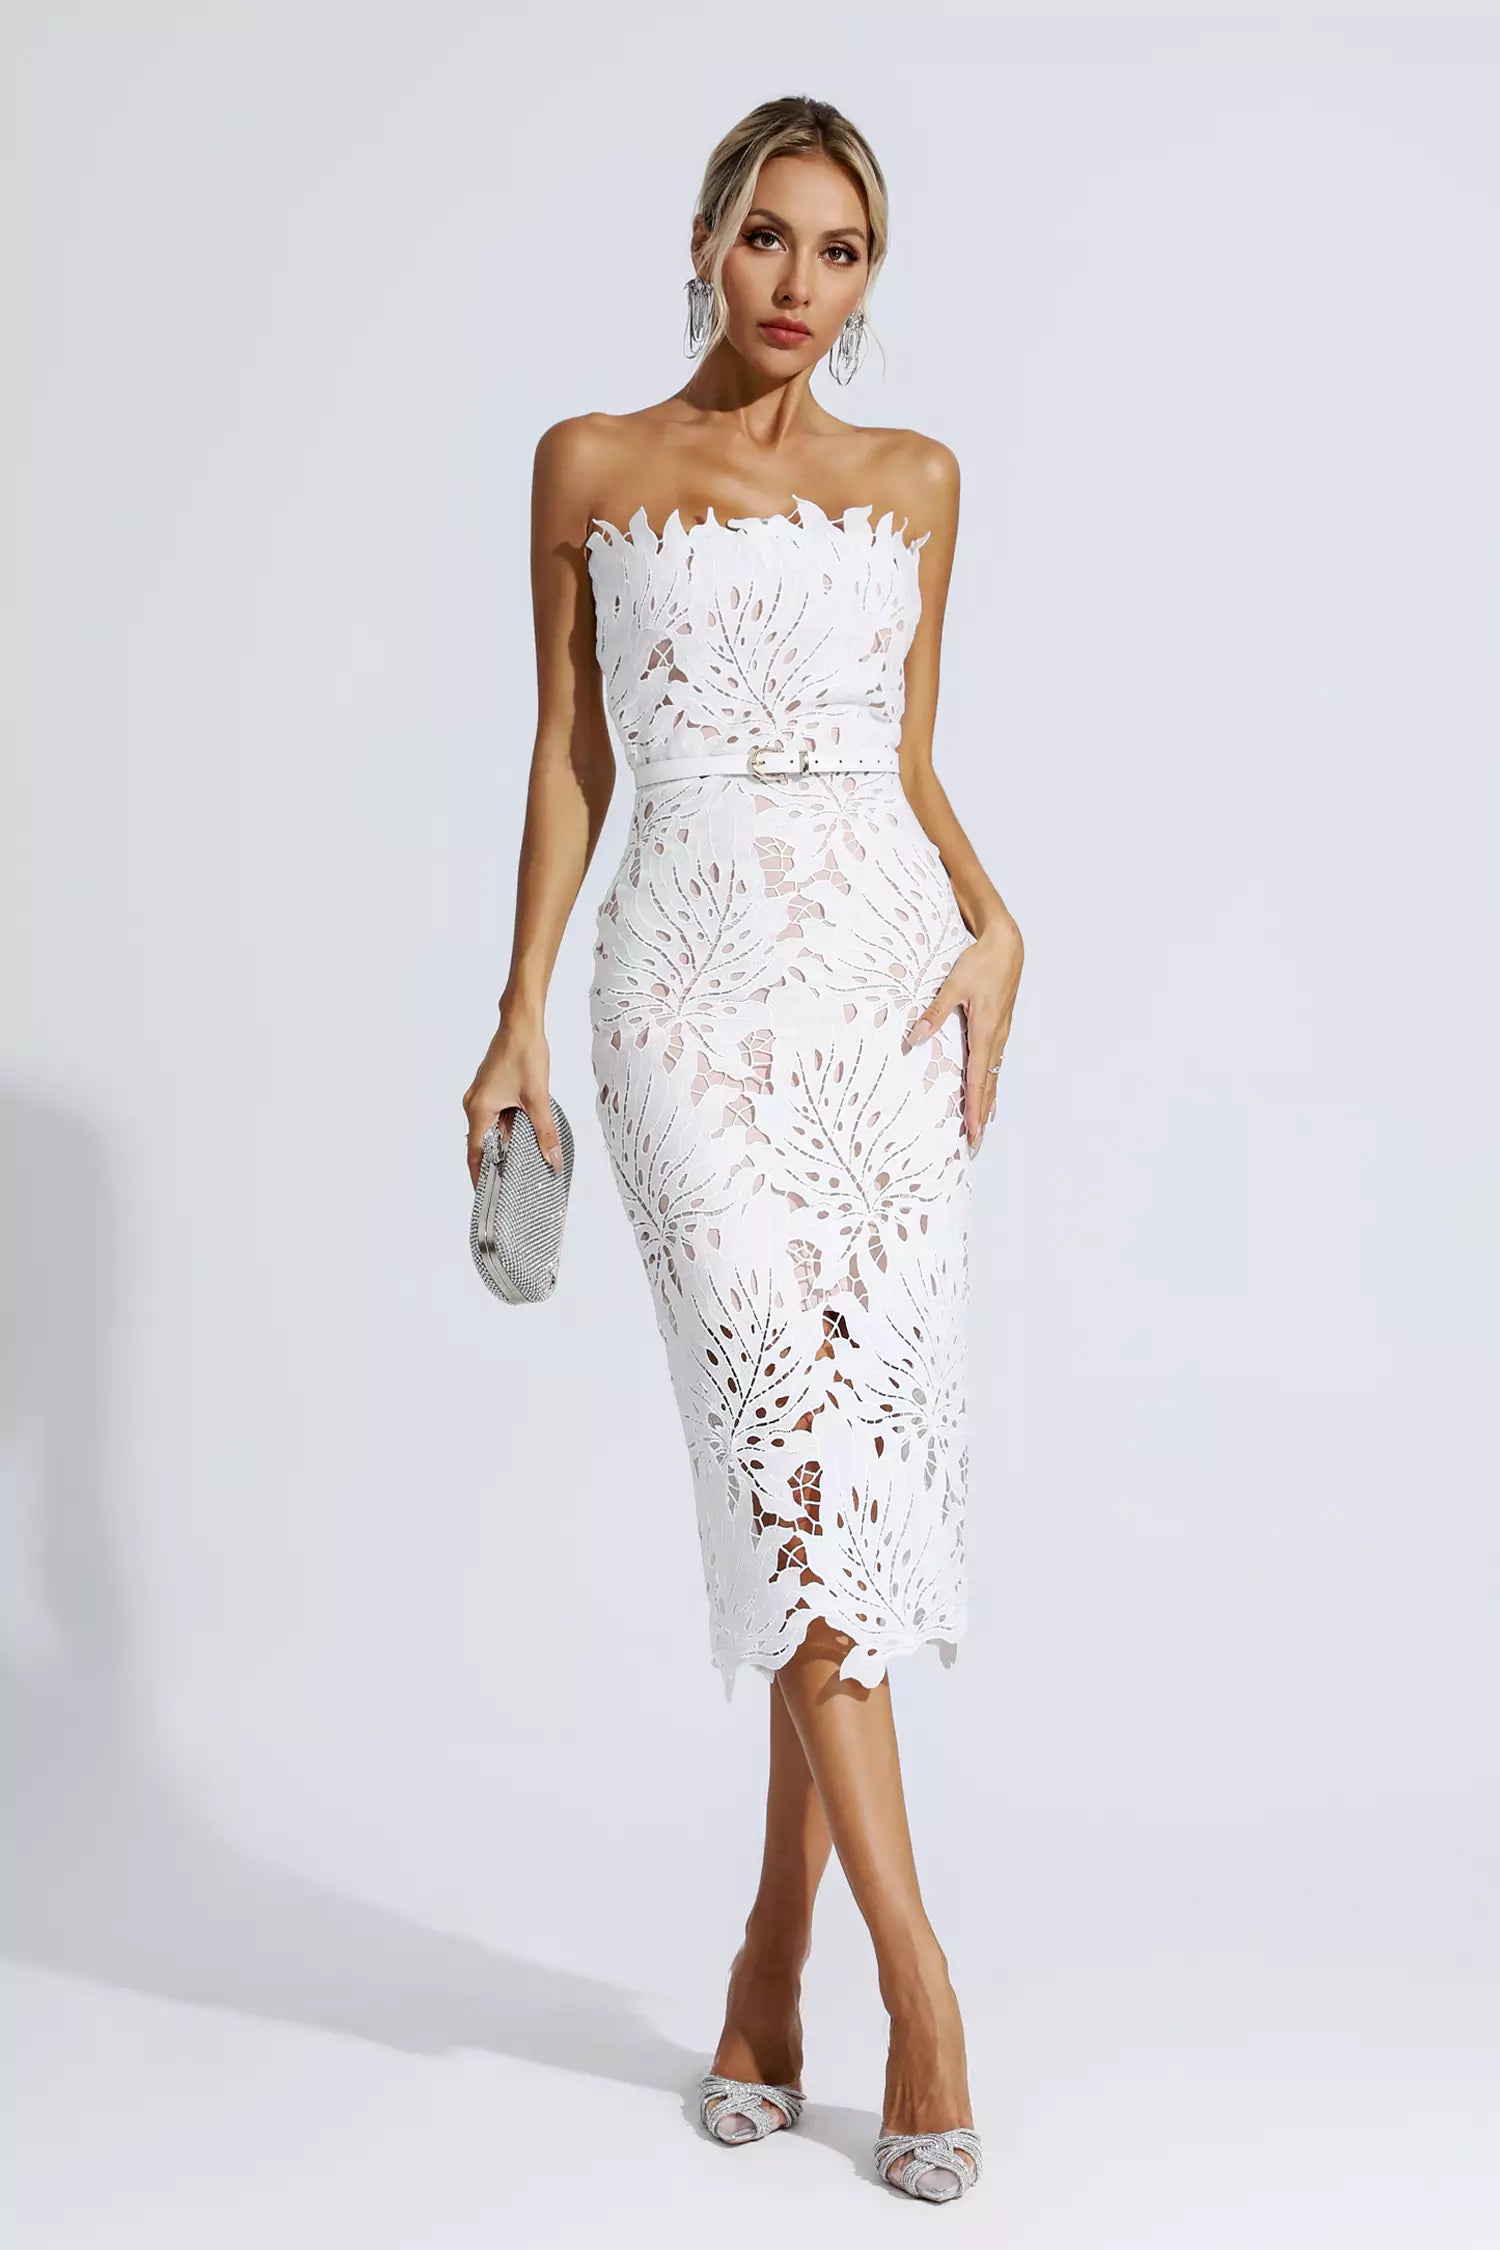 SC.Store ] L012 High Quality Womens Ladies Lace Sexy Dress